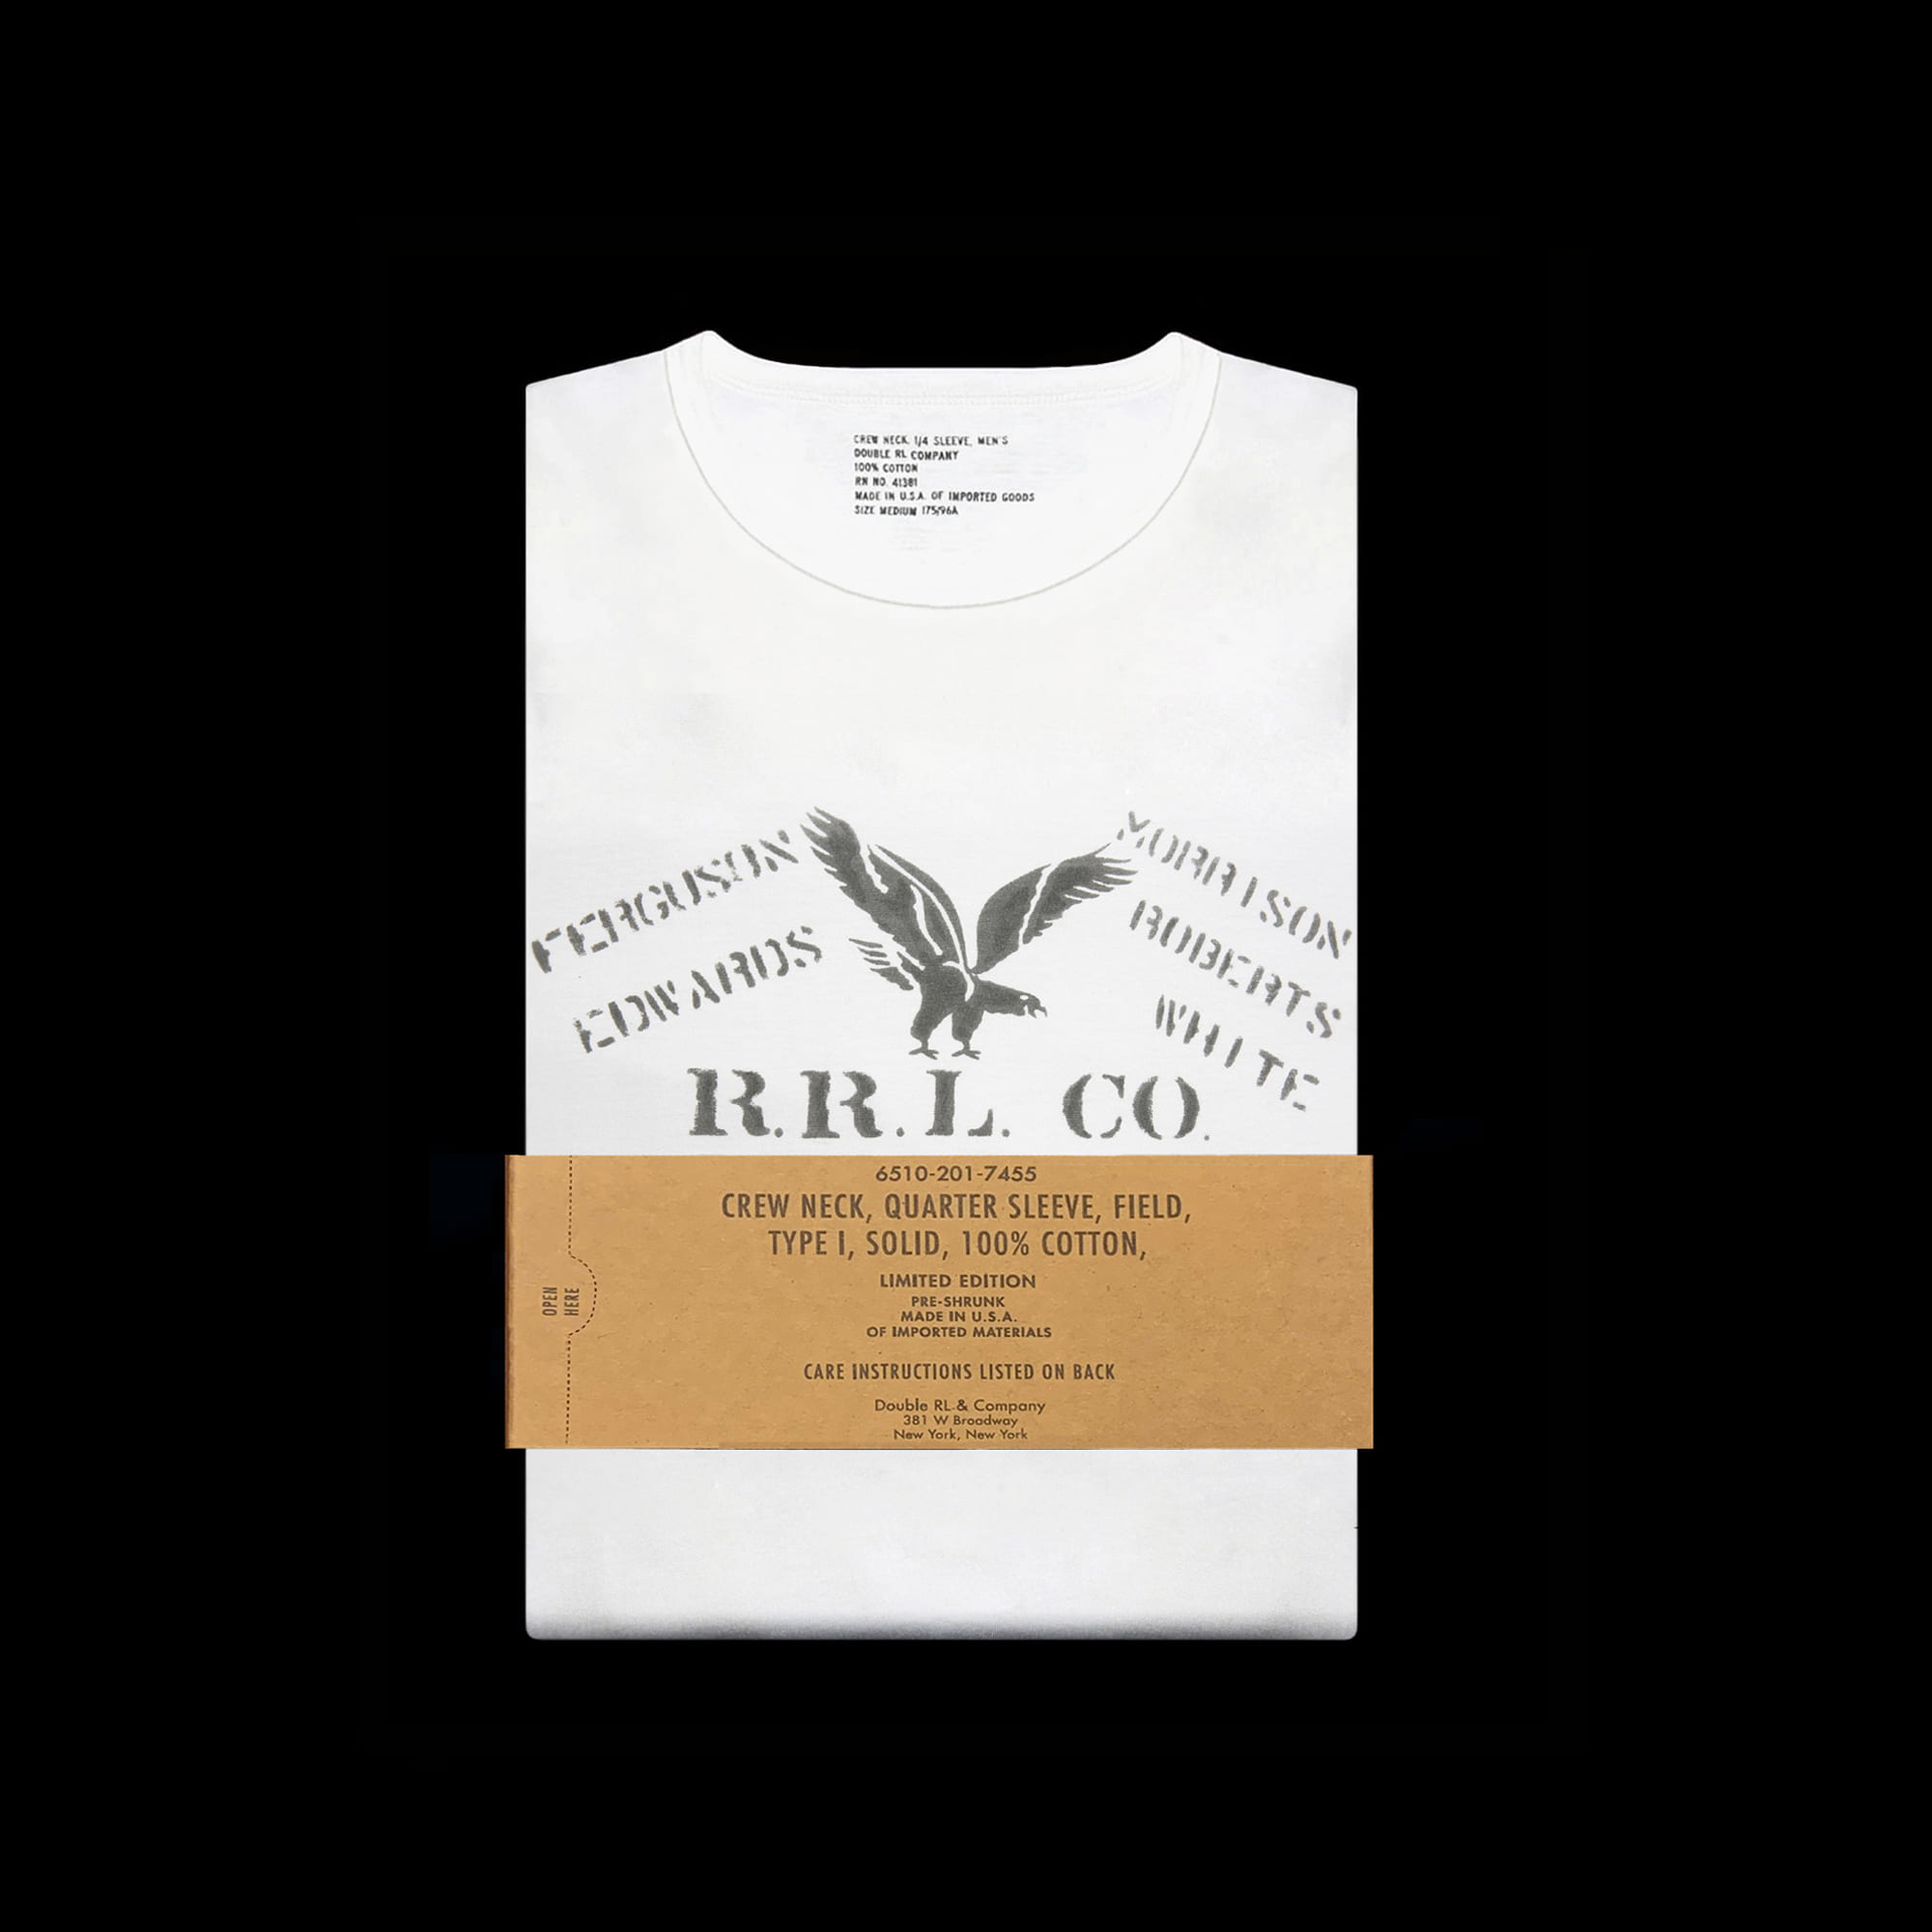 RRLLIMITED EDITIONGRAPHIC JERSEY T - SHIRT